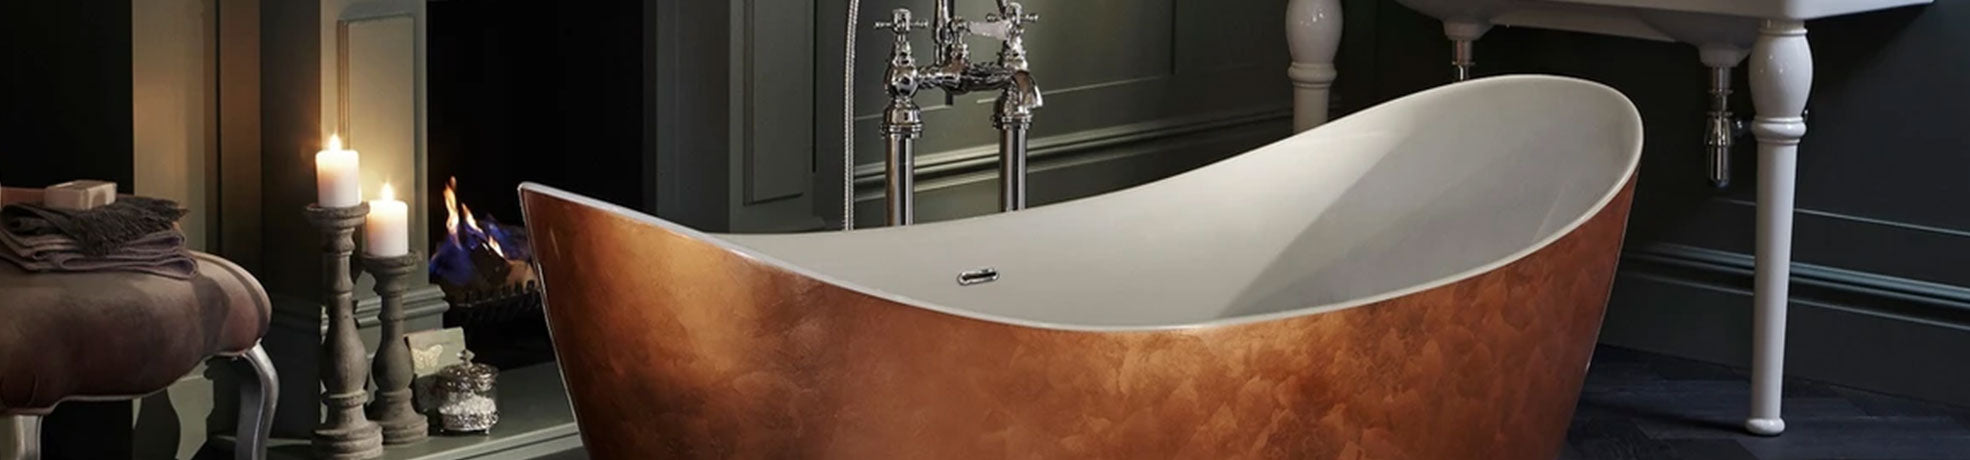 Heritage bathrooms range has a choice of freestanding acrylic baths, taps, showers, decorative heating, and accessories